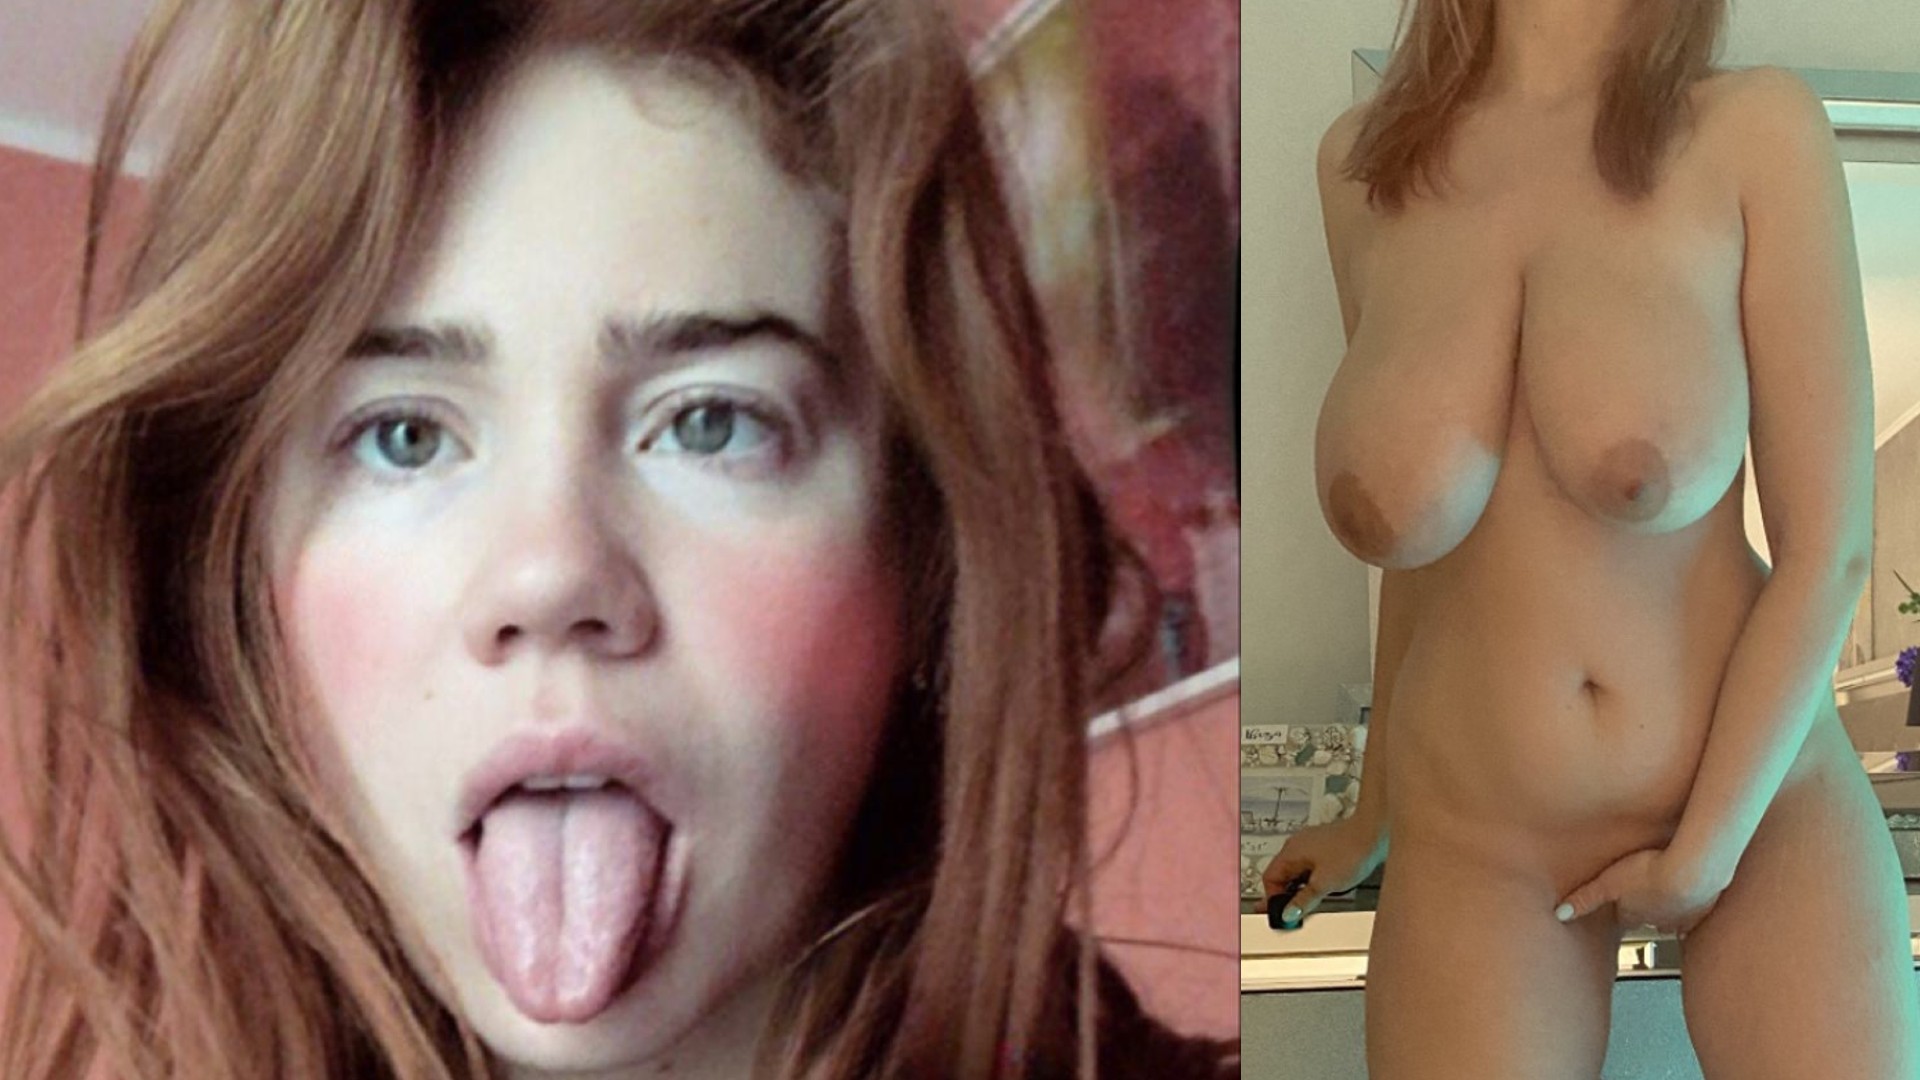 Palina Rojinski Nudes and updated collection of her boobs